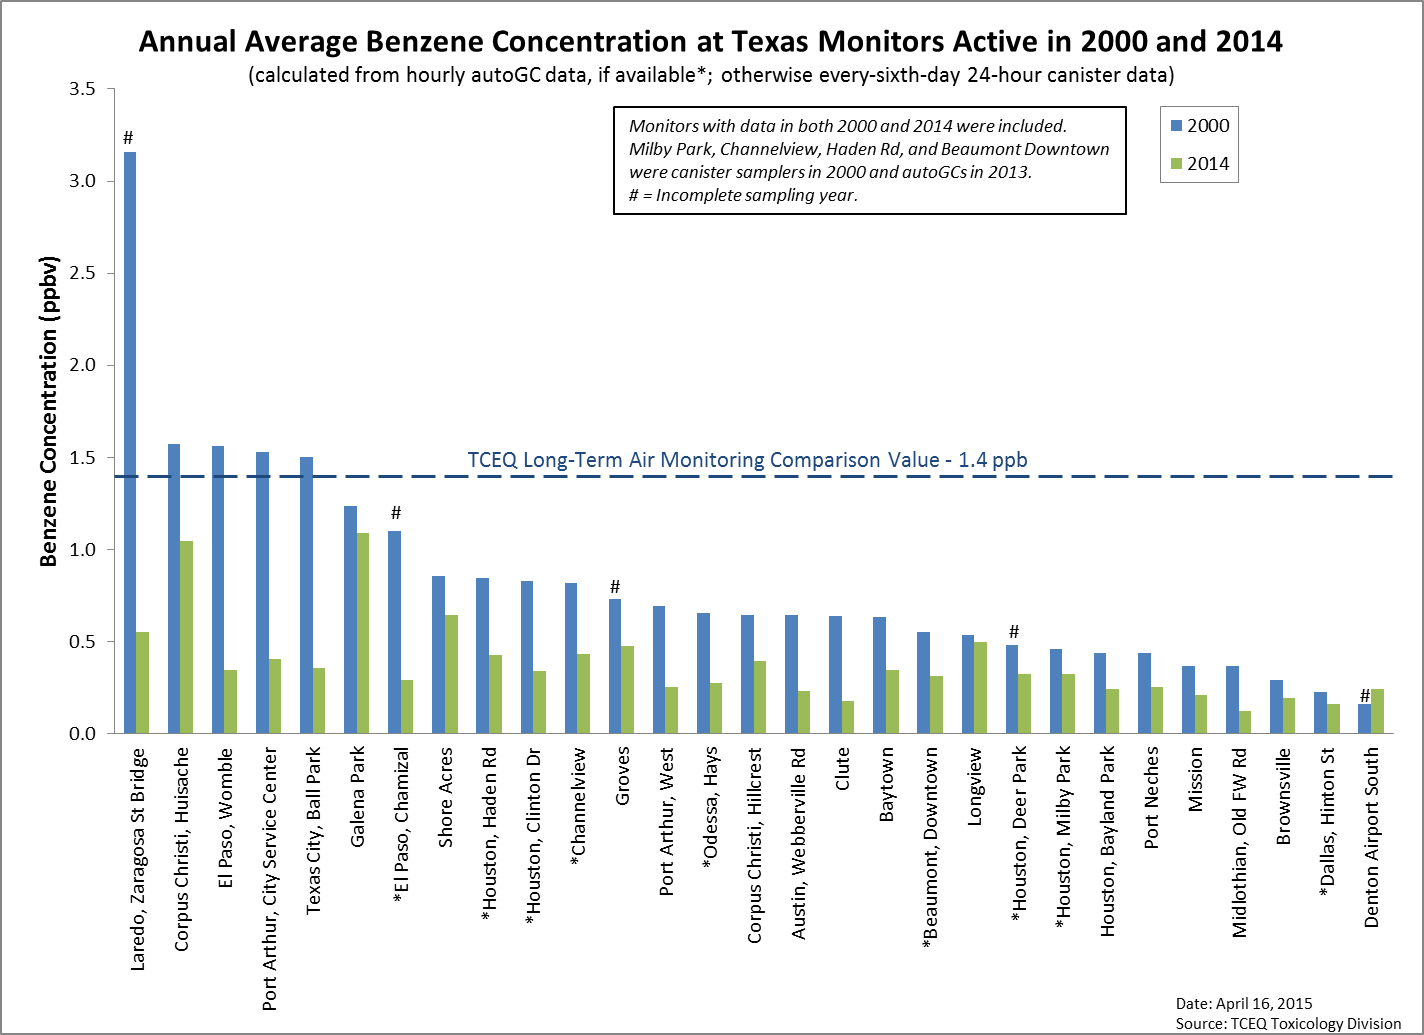 Figure 7. Annual average benzene concentration at Texas monitoring sites active in 2000 and 2014